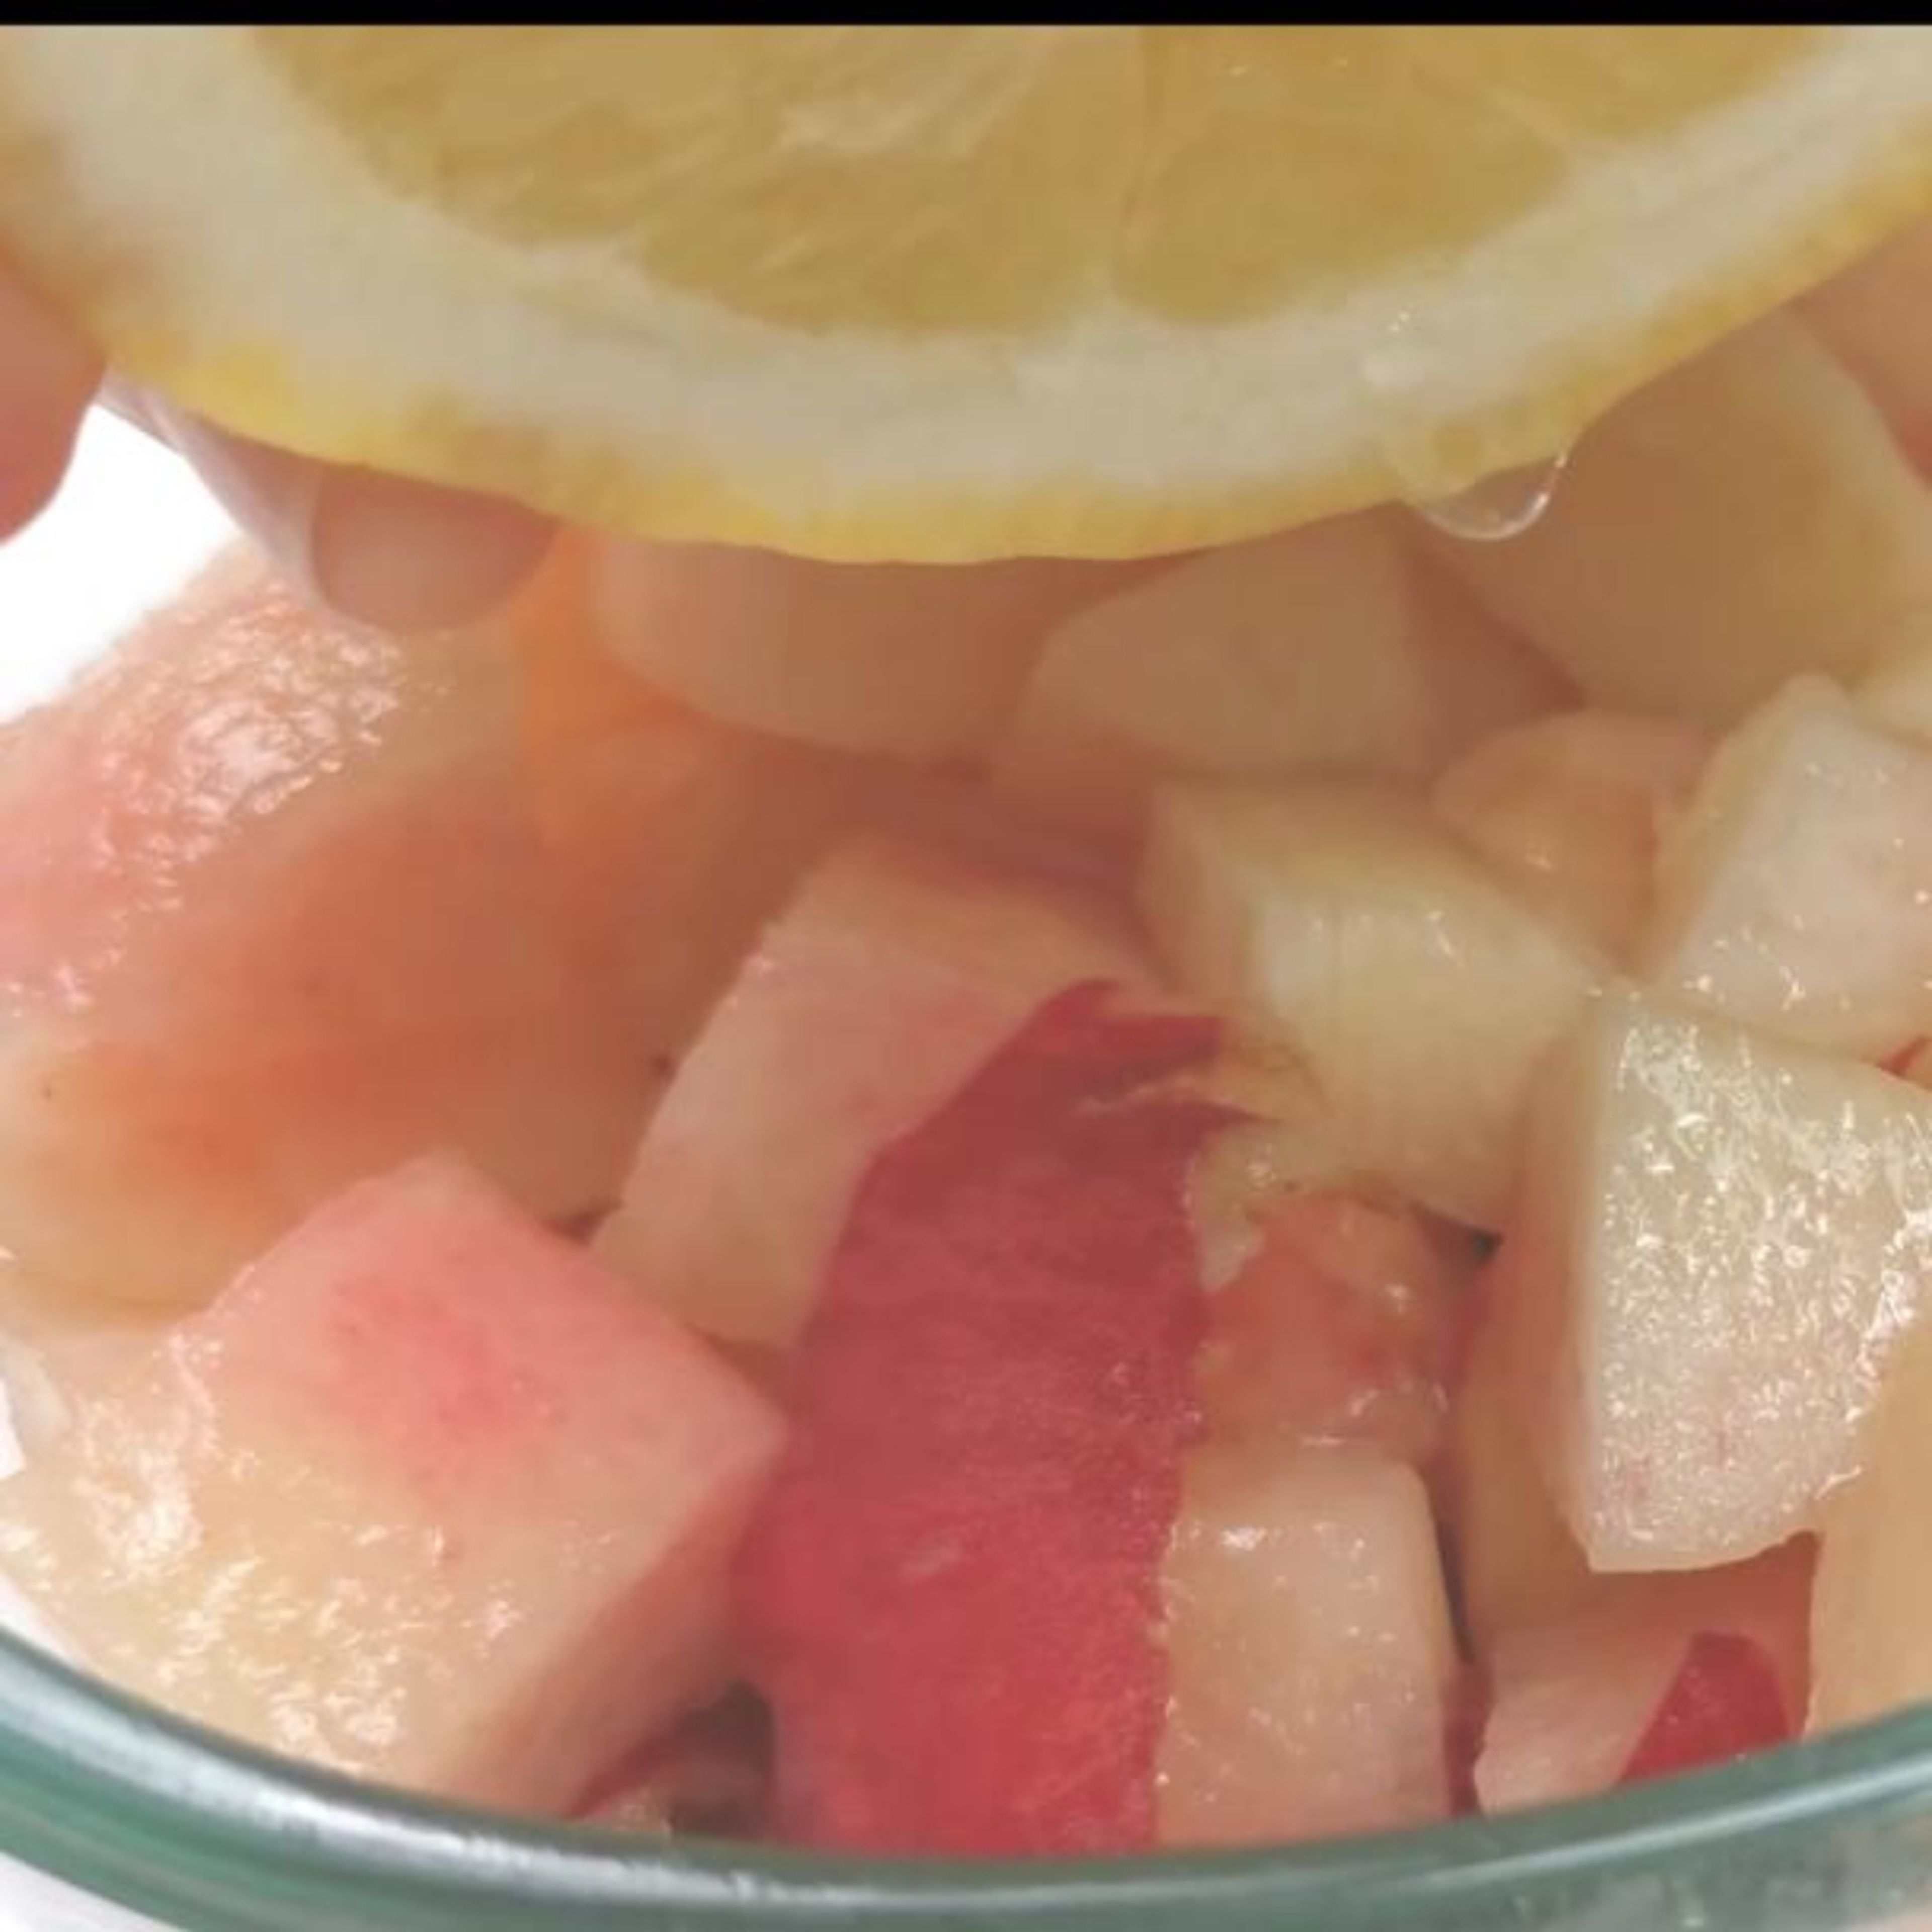 Combine the peach pulp and skin in a bowl, add lemon juice and sugar